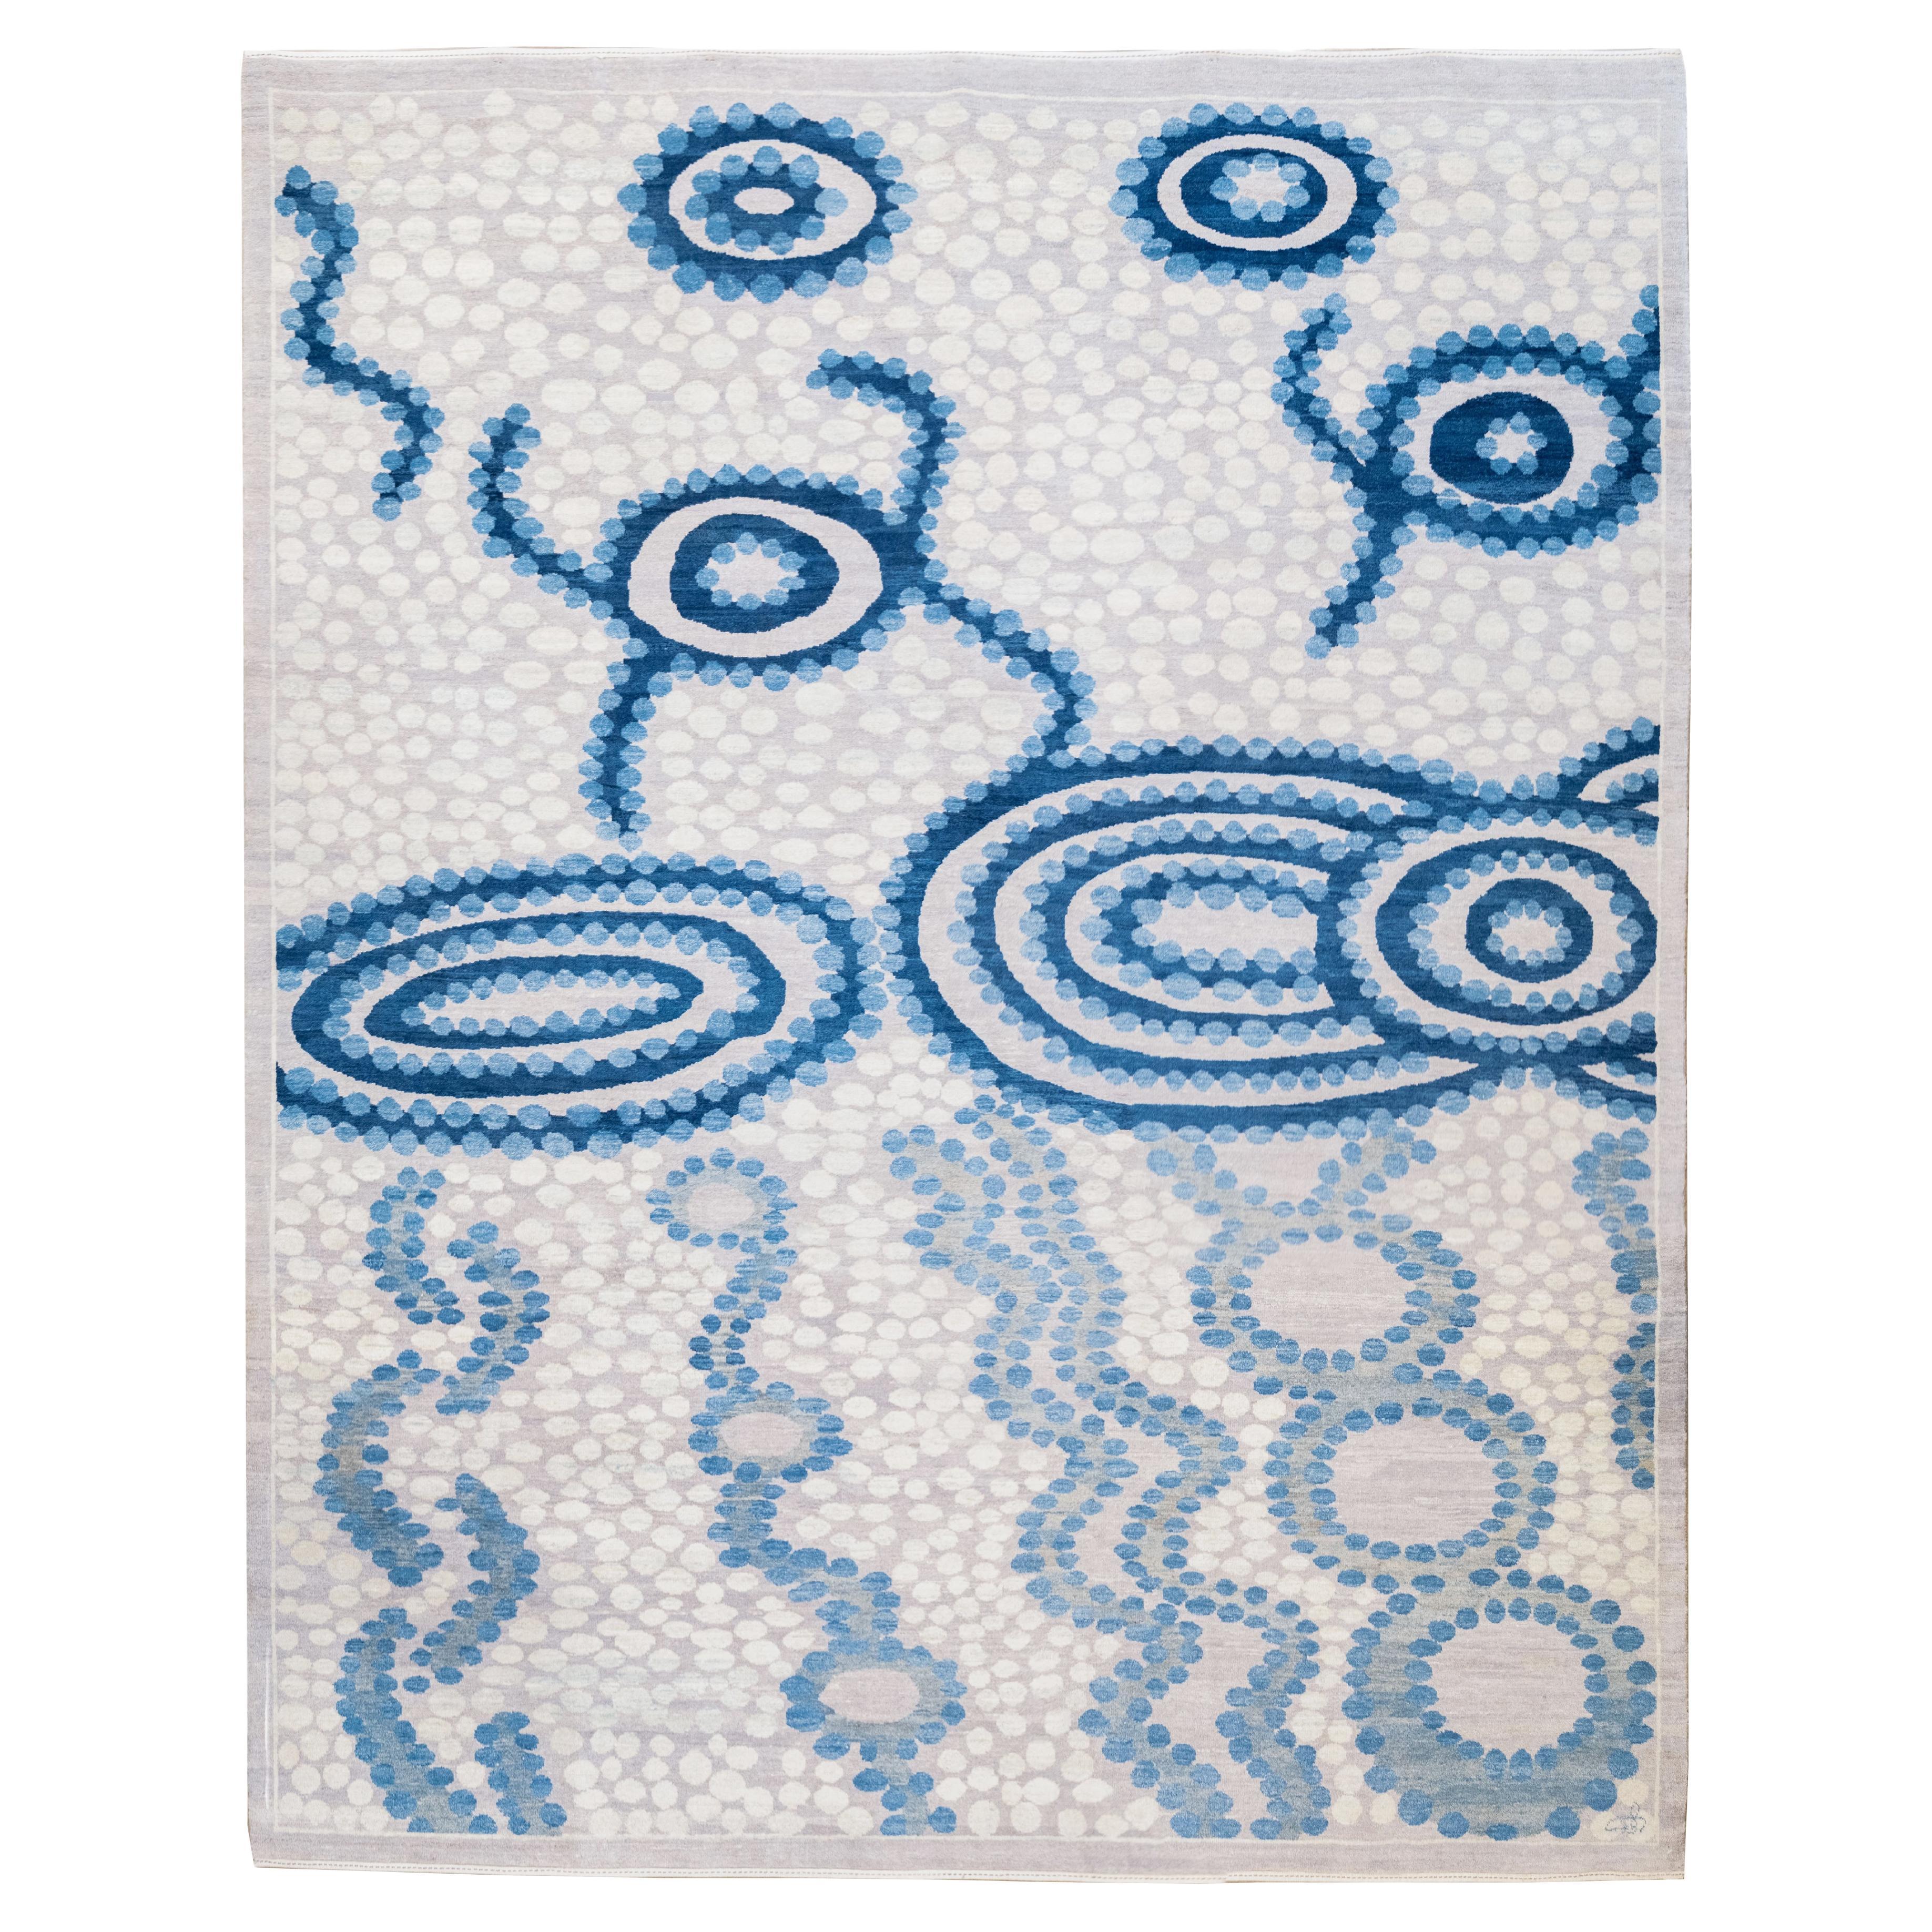 Blue and Cream Wool Modern Persian Carpet, Hand-Knotted, 8' x 10'